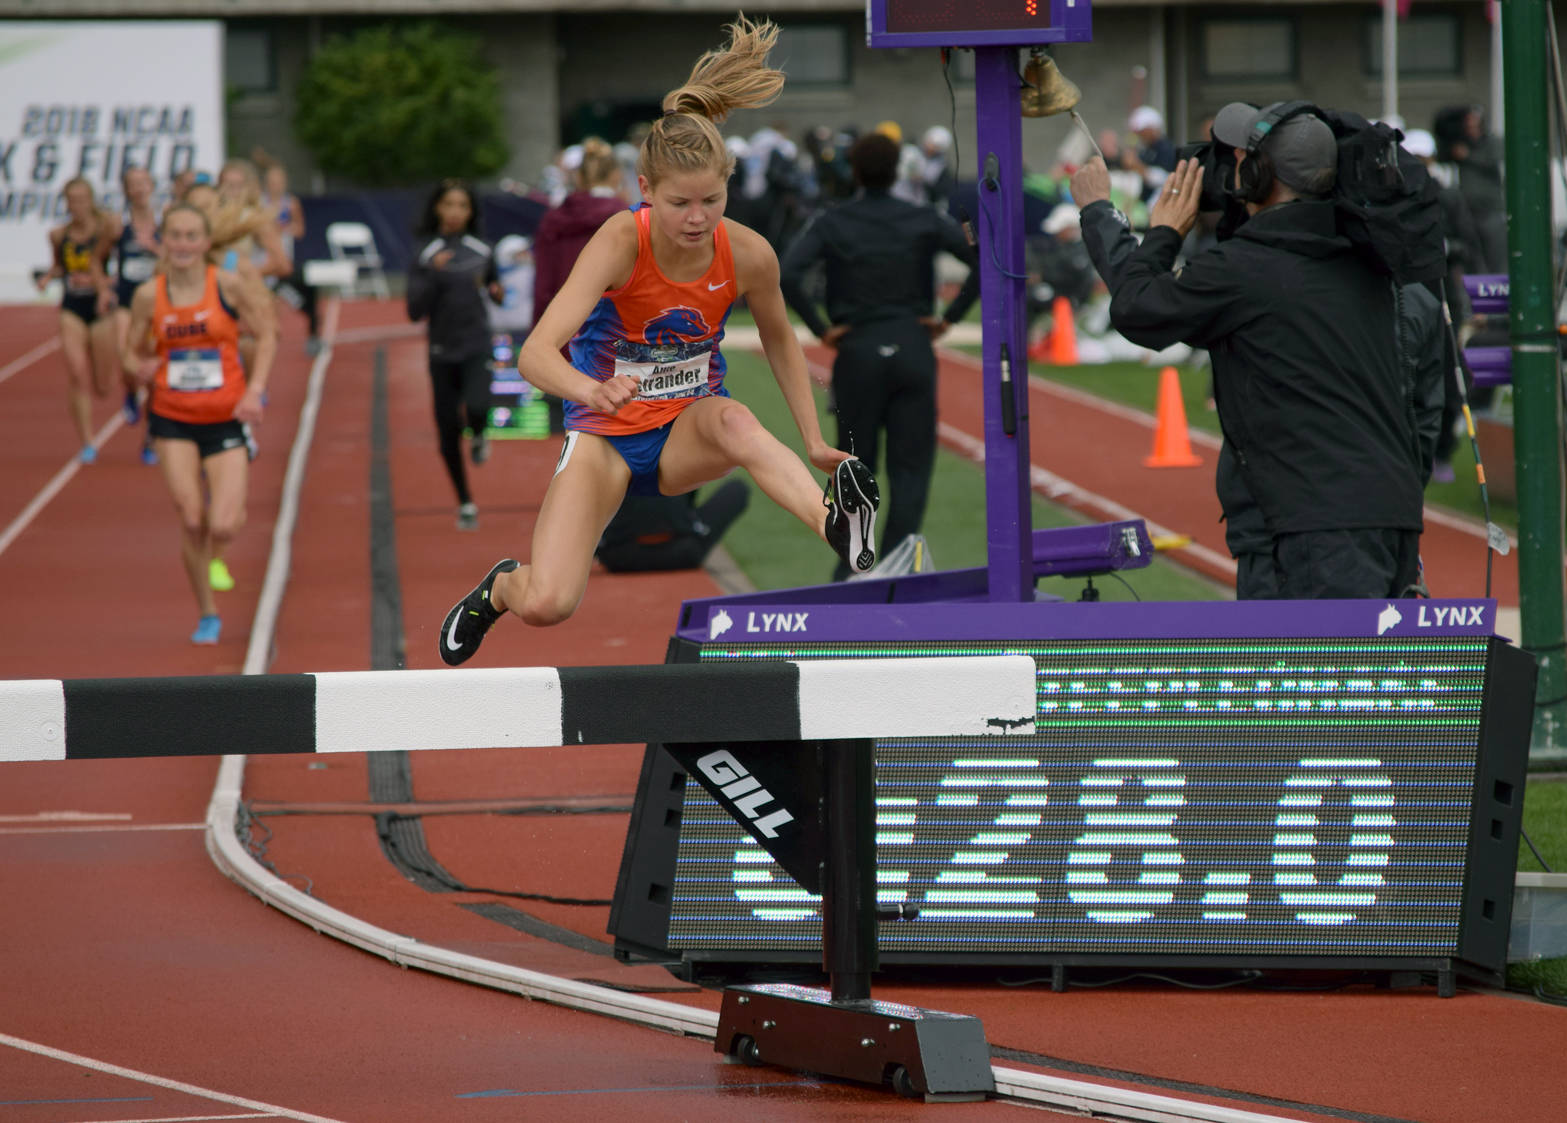 Boise State redshirt sophomore Allie Ostrander clears a hurdle en route to defending her 3,000-meter steeplechase title at the NCAA Outdoor Track and Field Championships in Eugene, Oregon, Saturday. (Photo provided by Boise State Athletics)